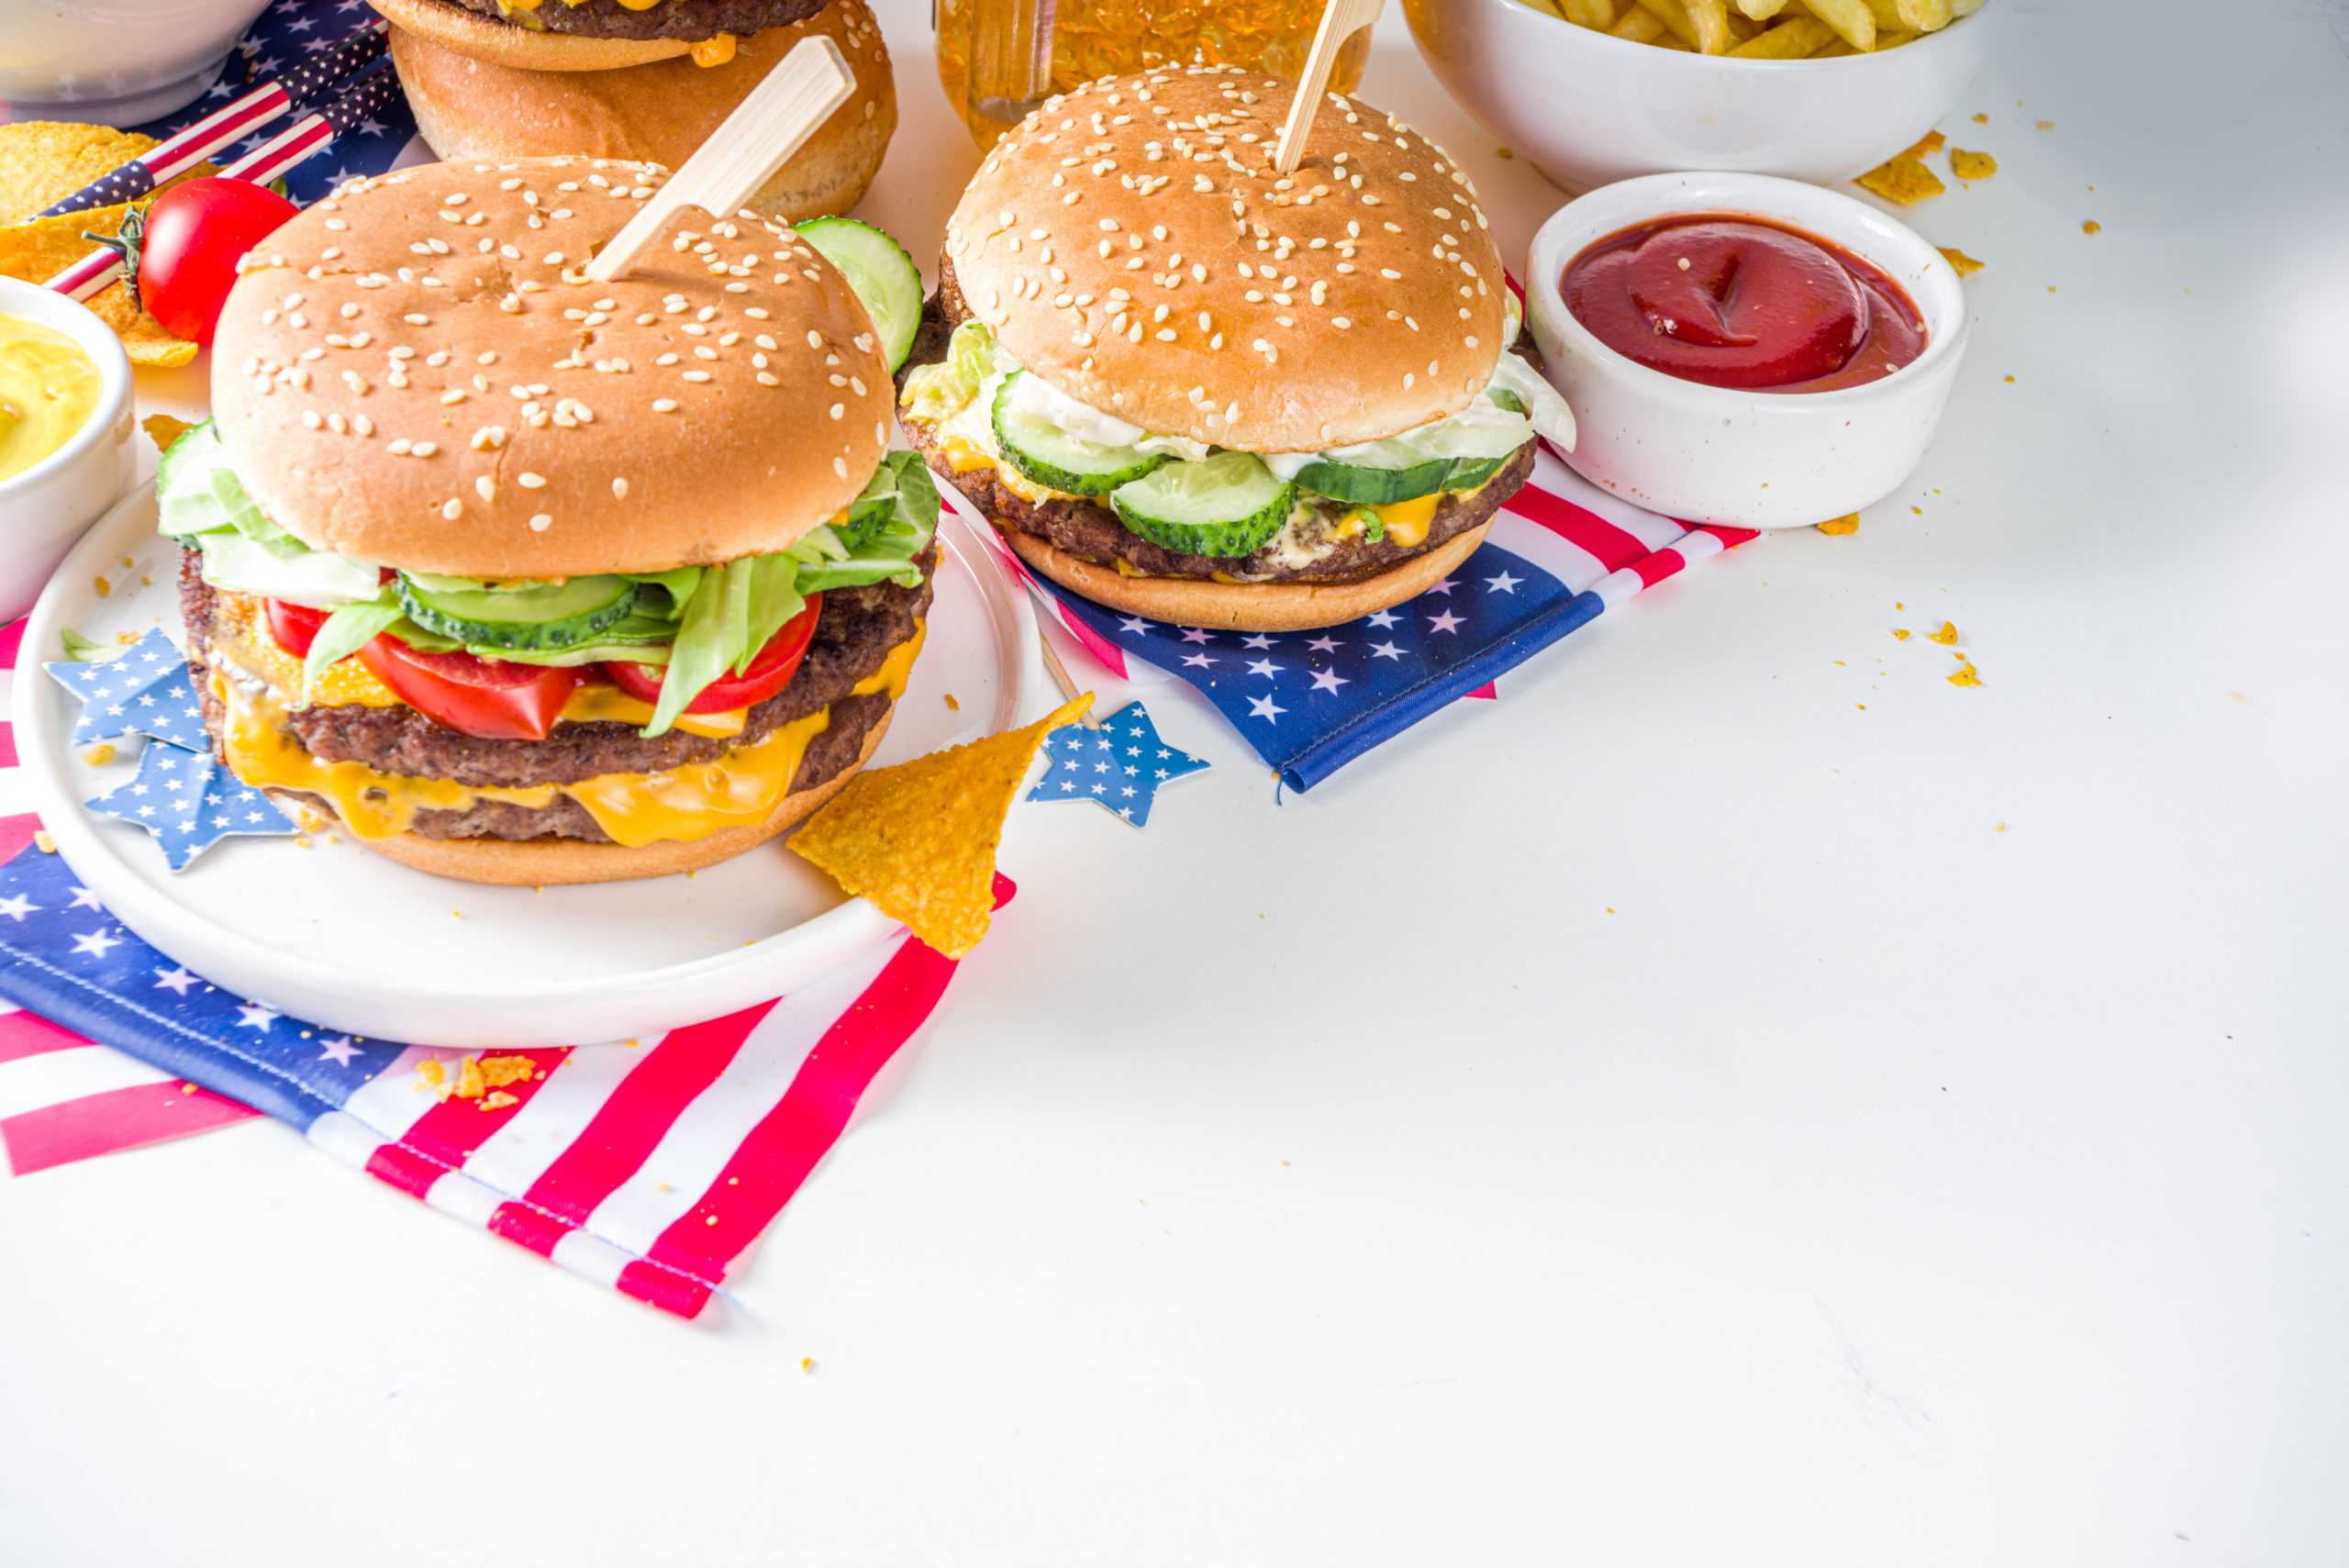 4 Ideas for Celebrating Fourth of July at Work to Show Employee Appreciation